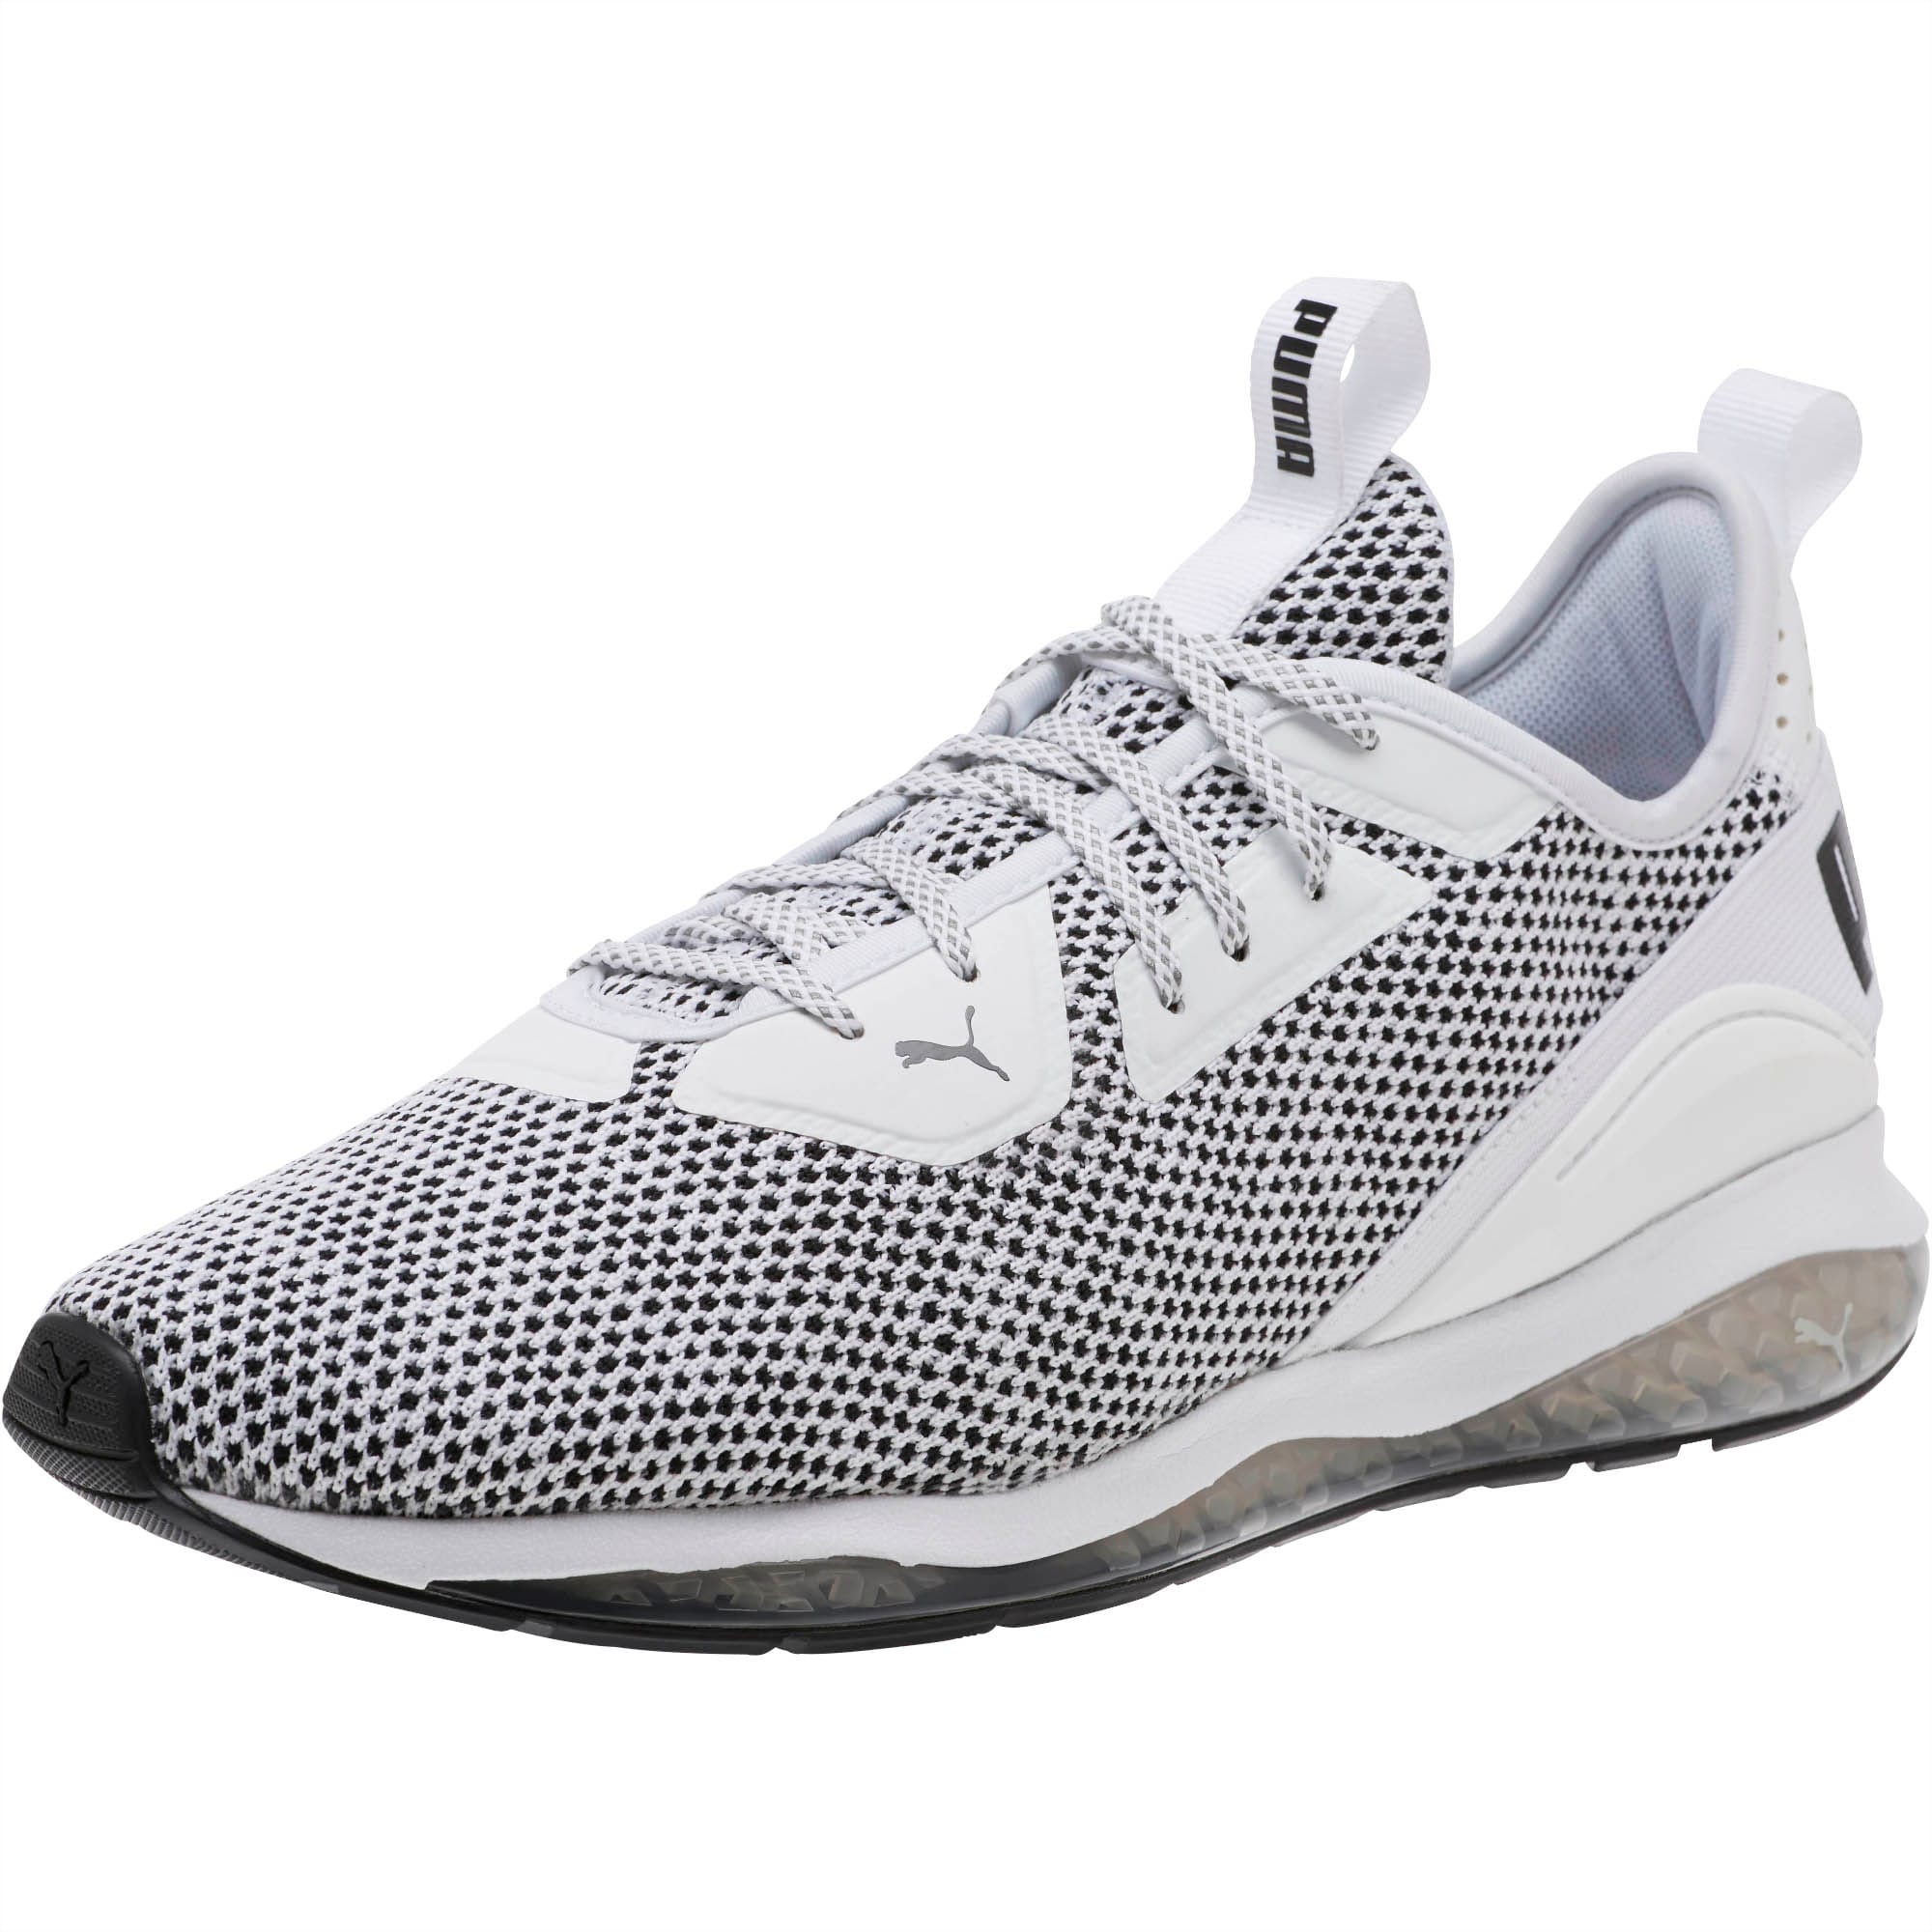 CELL Descend Running Shoes | PUMA US